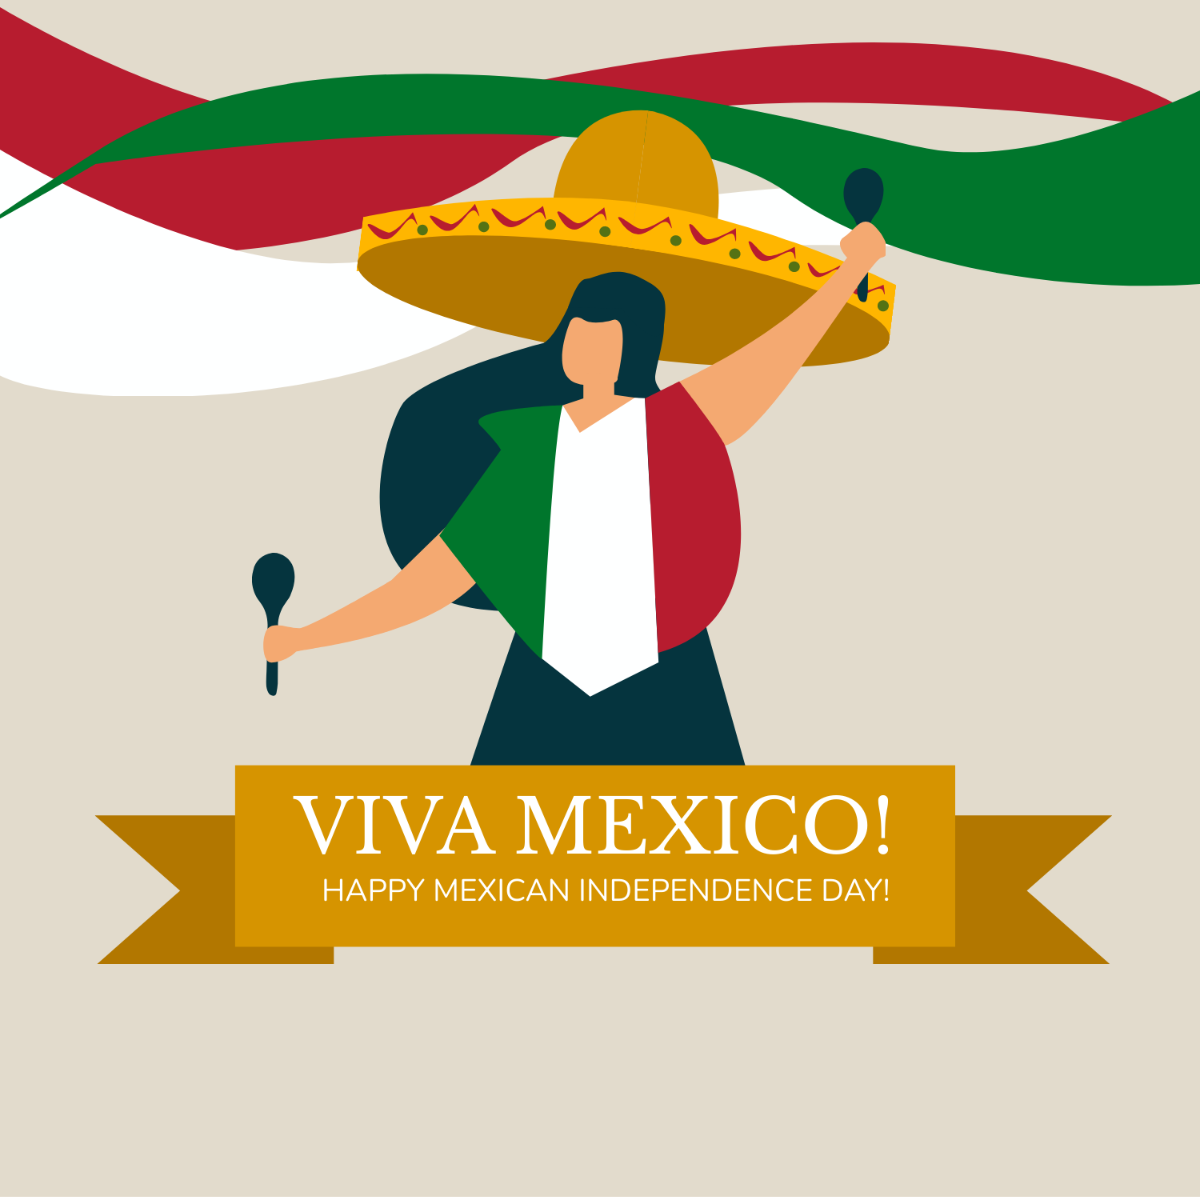 Happy Mexican Independence Day Illustration